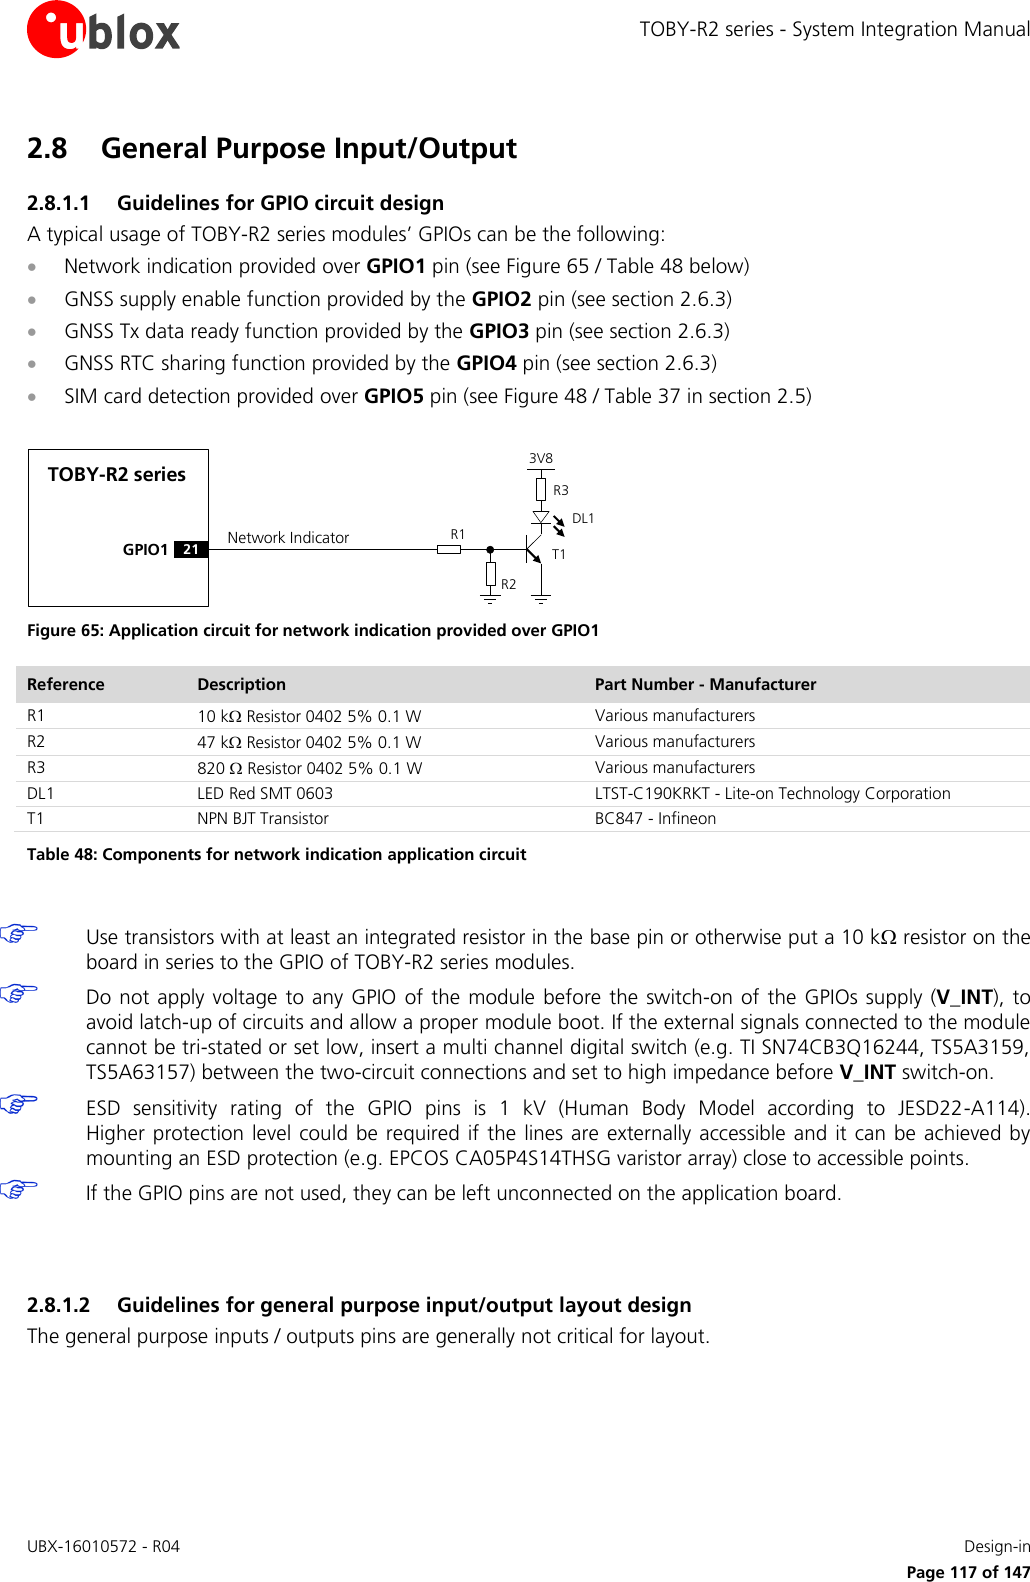 TOBY-R2 series - System Integration Manual UBX-16010572 - R04    Design-in     Page 117 of 147 2.8 General Purpose Input/Output 2.8.1.1 Guidelines for GPIO circuit design A typical usage of TOBY-R2 series modules’ GPIOs can be the following:  Network indication provided over GPIO1 pin (see Figure 65 / Table 48 below)  GNSS supply enable function provided by the GPIO2 pin (see section 2.6.3)  GNSS Tx data ready function provided by the GPIO3 pin (see section 2.6.3)  GNSS RTC sharing function provided by the GPIO4 pin (see section 2.6.3)  SIM card detection provided over GPIO5 pin (see Figure 48 / Table 37 in section 2.5)  TOBY-R2 seriesGPIO1R1R33V8Network IndicatorR221DL1T1 Figure 65: Application circuit for network indication provided over GPIO1 Reference Description Part Number - Manufacturer R1 10 k Resistor 0402 5% 0.1 W Various manufacturers R2 47 k Resistor 0402 5% 0.1 W Various manufacturers R3 820  Resistor 0402 5% 0.1 W Various manufacturers DL1 LED Red SMT 0603 LTST-C190KRKT - Lite-on Technology Corporation T1 NPN BJT Transistor BC847 - Infineon Table 48: Components for network indication application circuit   Use transistors with at least an integrated resistor in the base pin or otherwise put a 10 k resistor on the board in series to the GPIO of TOBY-R2 series modules.  Do not apply voltage  to  any GPIO  of  the module before the switch-on of the GPIOs supply (V_INT),  to avoid latch-up of circuits and allow a proper module boot. If the external signals connected to the module cannot be tri-stated or set low, insert a multi channel digital switch (e.g. TI SN74CB3Q16244, TS5A3159, TS5A63157) between the two-circuit connections and set to high impedance before V_INT switch-on.  ESD  sensitivity  rating  of  the  GPIO  pins  is  1  kV  (Human  Body  Model  according  to  JESD22-A114).  Higher protection level could  be  required if the lines are externally accessible and it can be  achieved by mounting an ESD protection (e.g. EPCOS CA05P4S14THSG varistor array) close to accessible points.  If the GPIO pins are not used, they can be left unconnected on the application board.   2.8.1.2 Guidelines for general purpose input/output layout design The general purpose inputs / outputs pins are generally not critical for layout.  